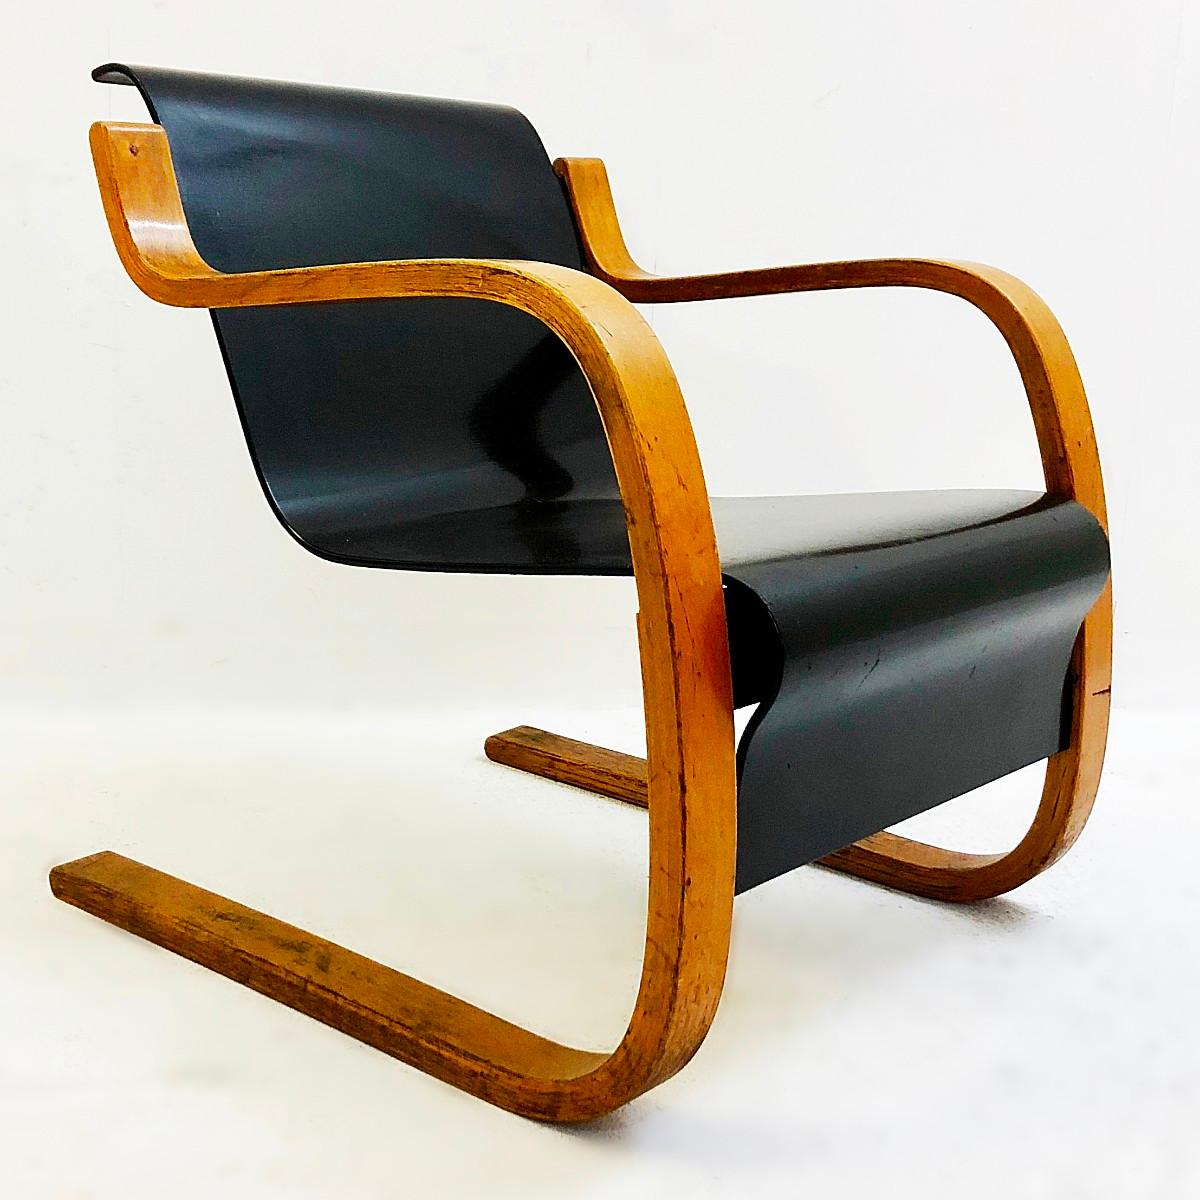 Finnish Pair of Chairs Model 31 in Birchwood by Alvar Aalto, Finland, circa 1930s